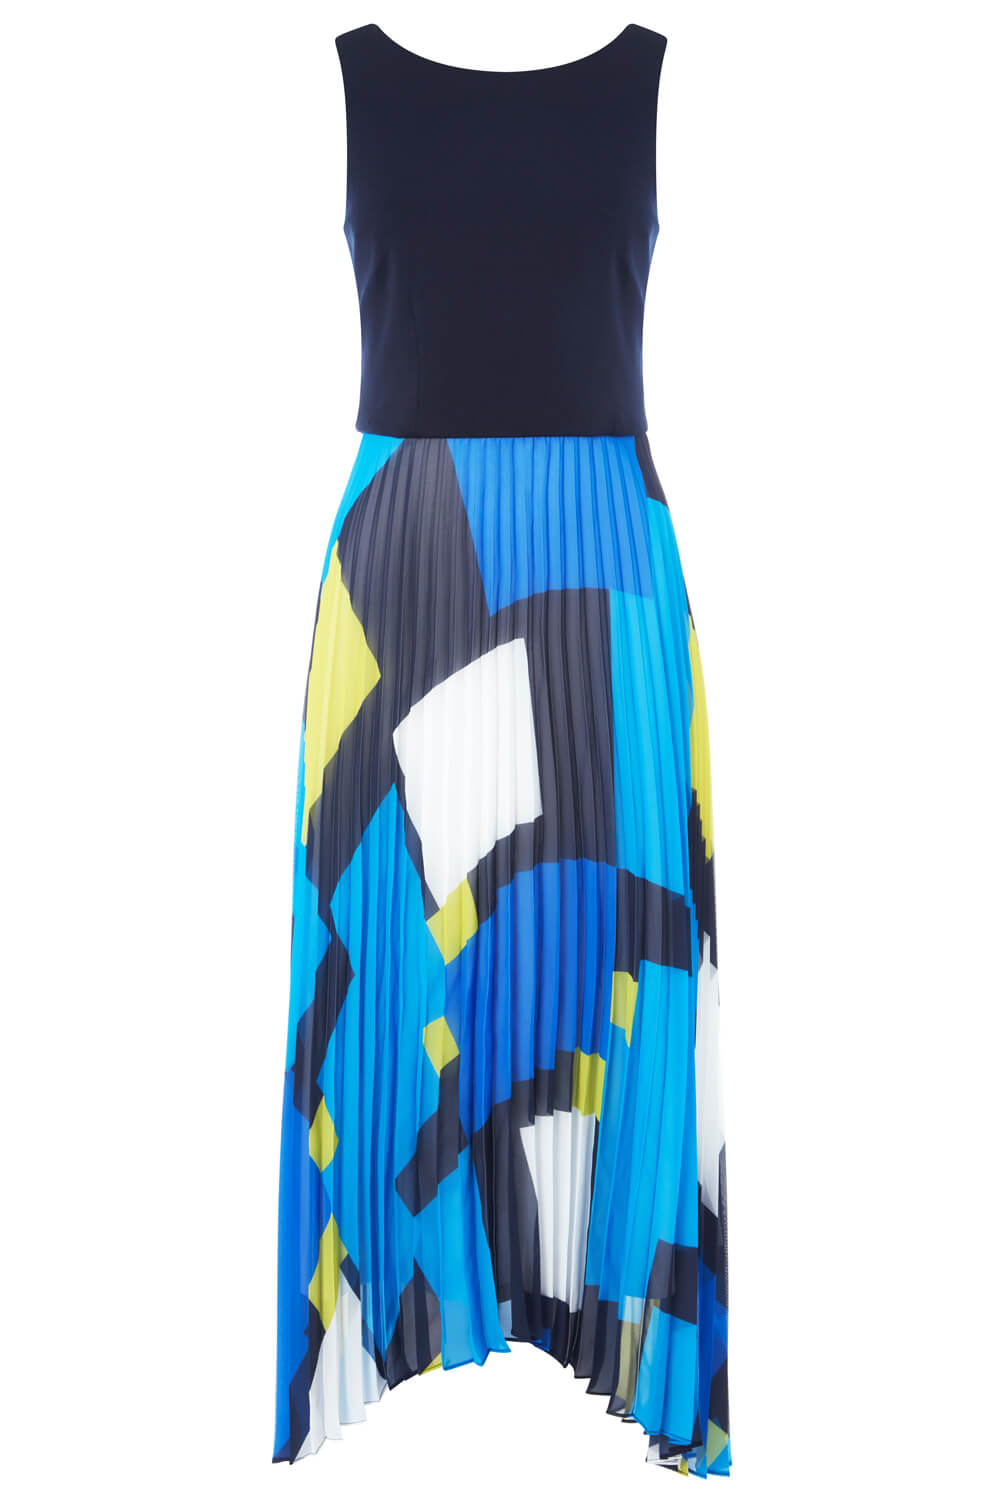 Blue Fit and Flare Pleated Midi Dress, Image 5 of 5